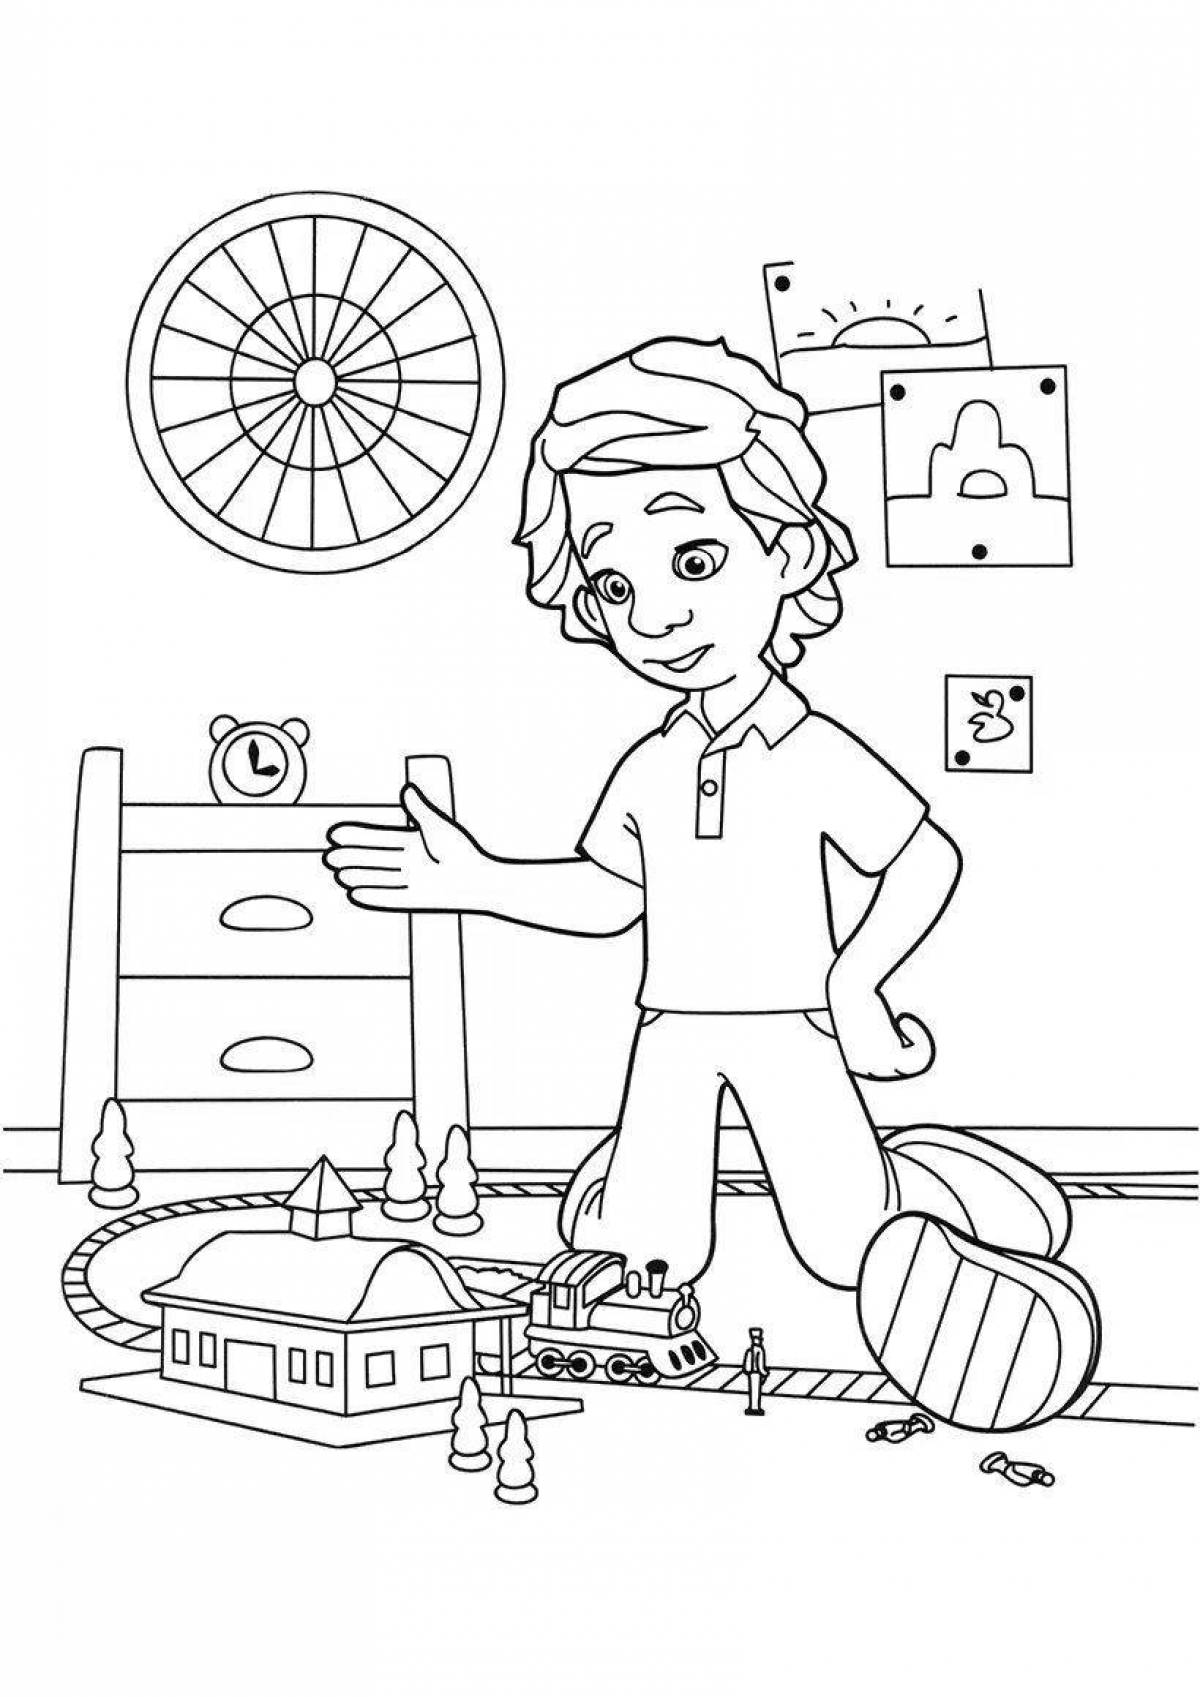 Living pliers coloring page